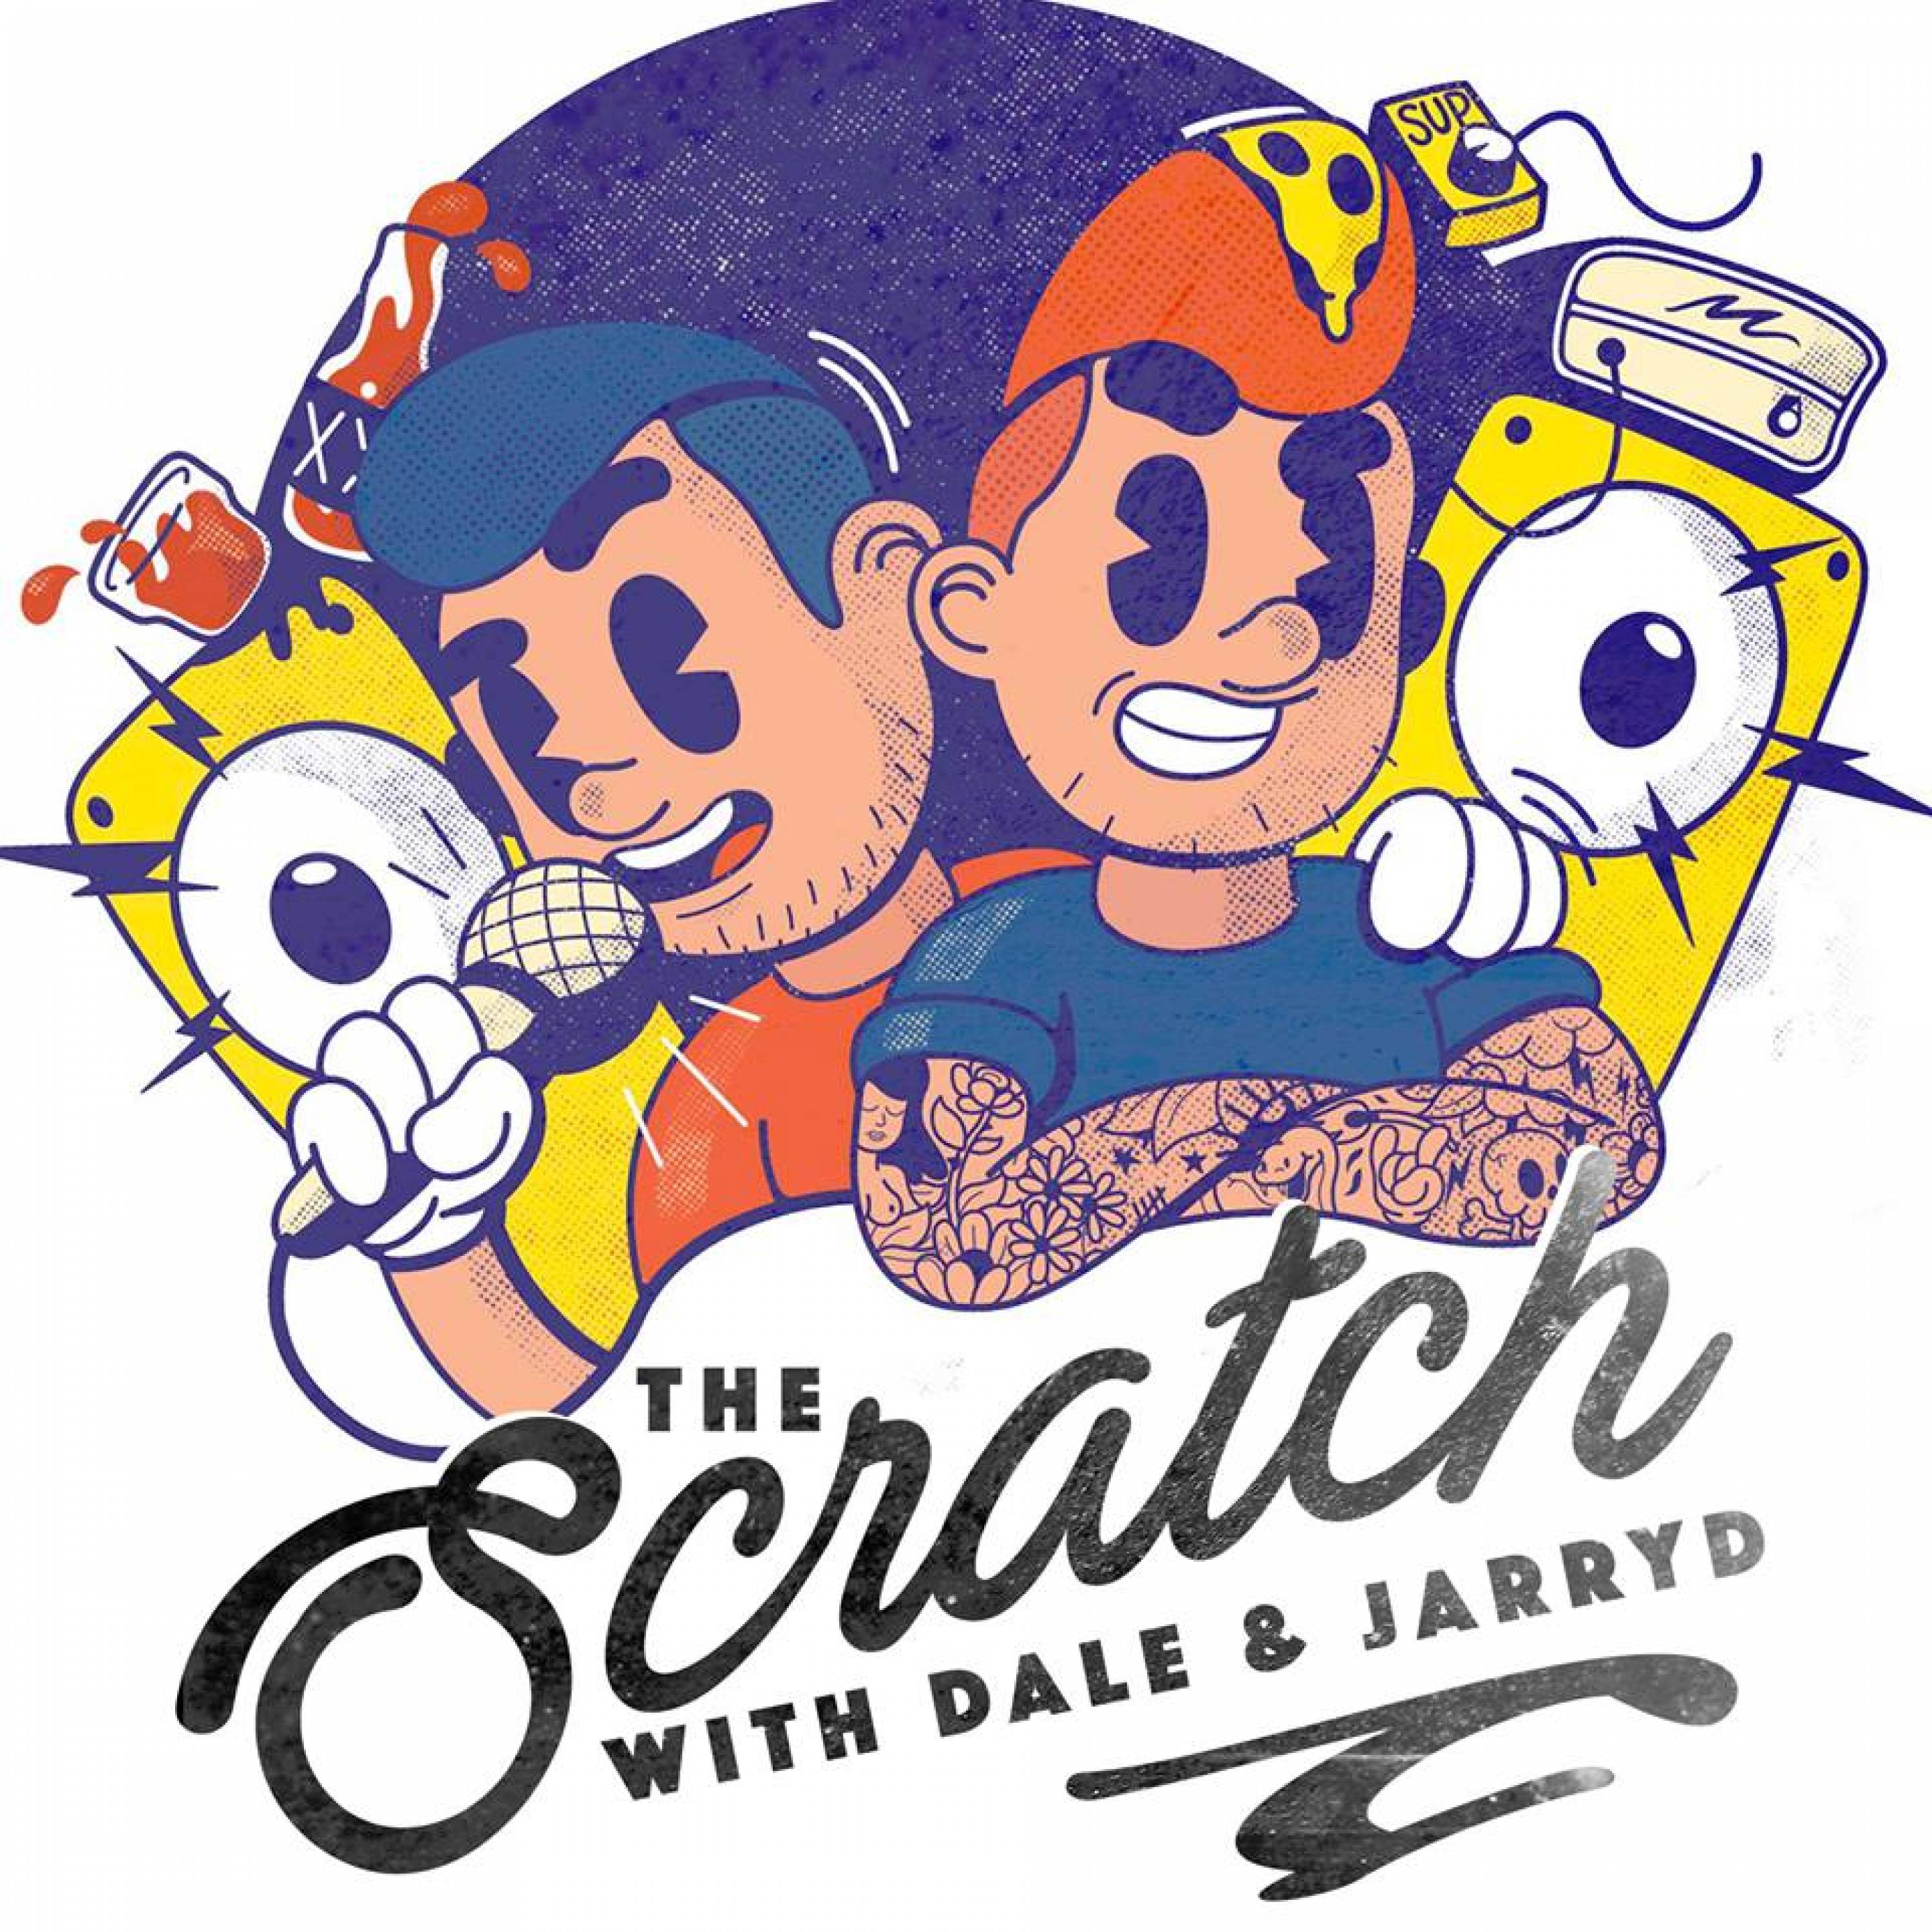 The Scratch with Dale & Jarryd